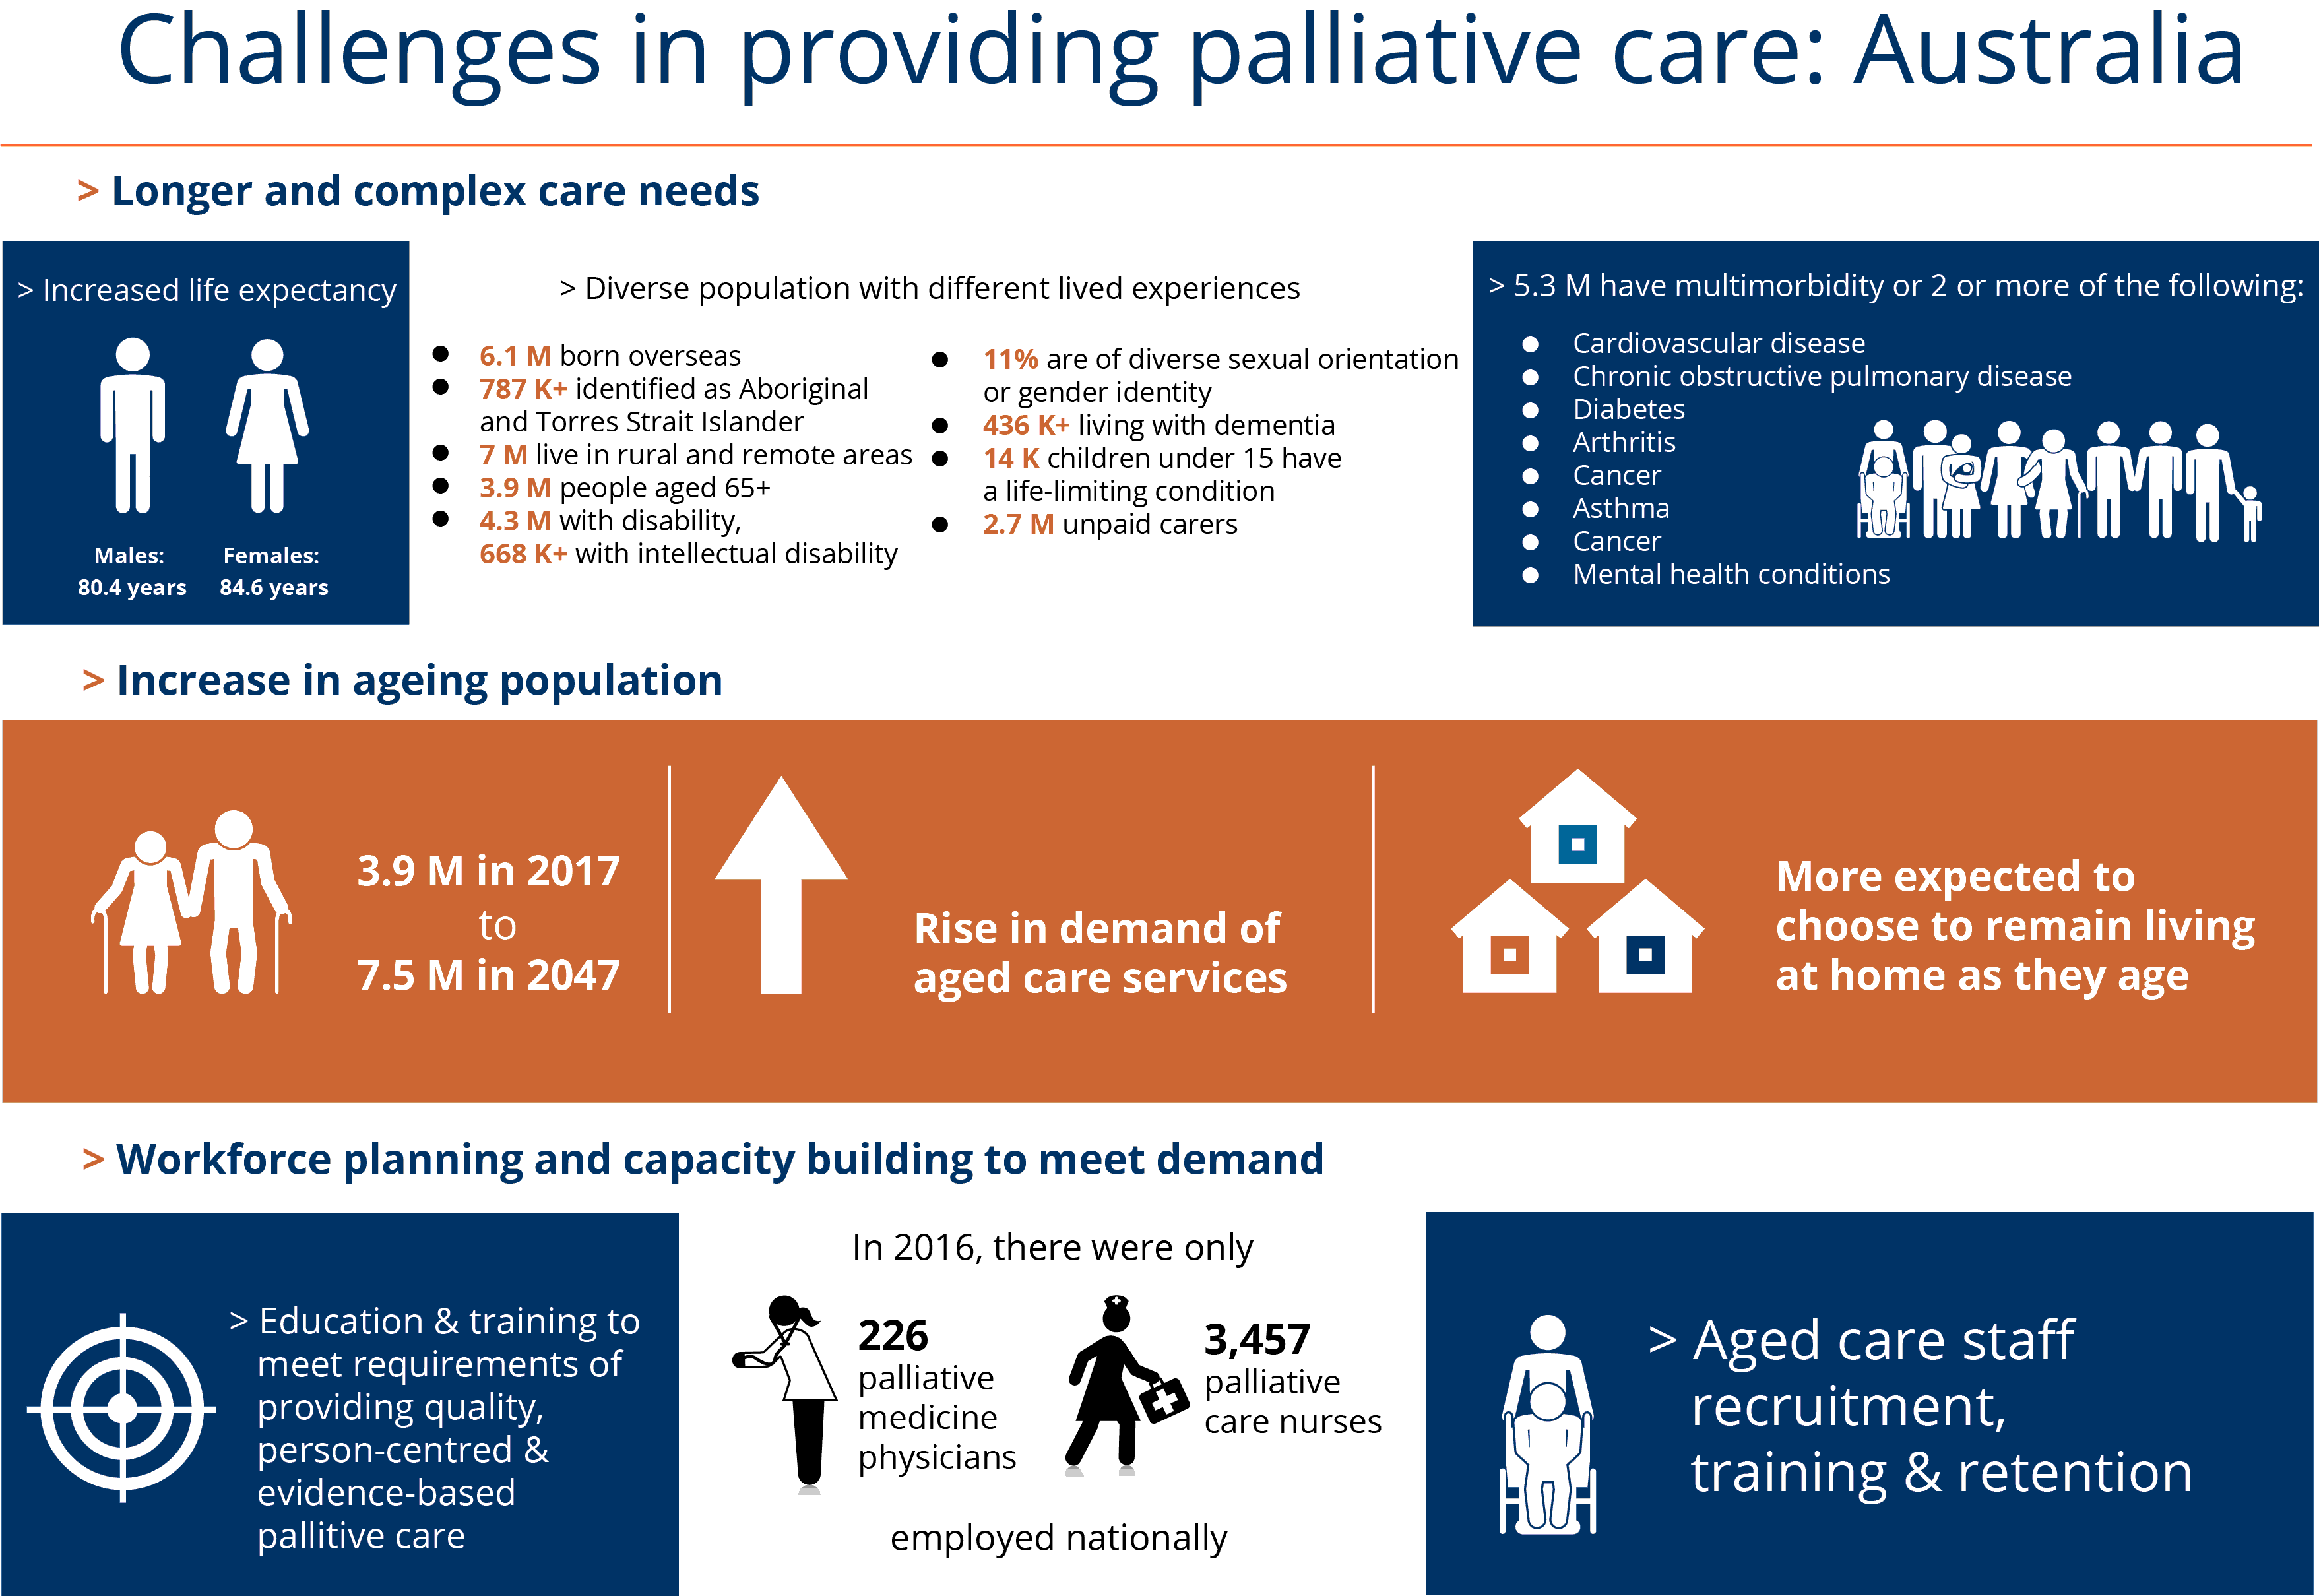 Info graphic showing: Challenges in palliative care: Australia - Longer and complex care needs, Increase in ageing population, Workforce planning and capacity building to meet demand